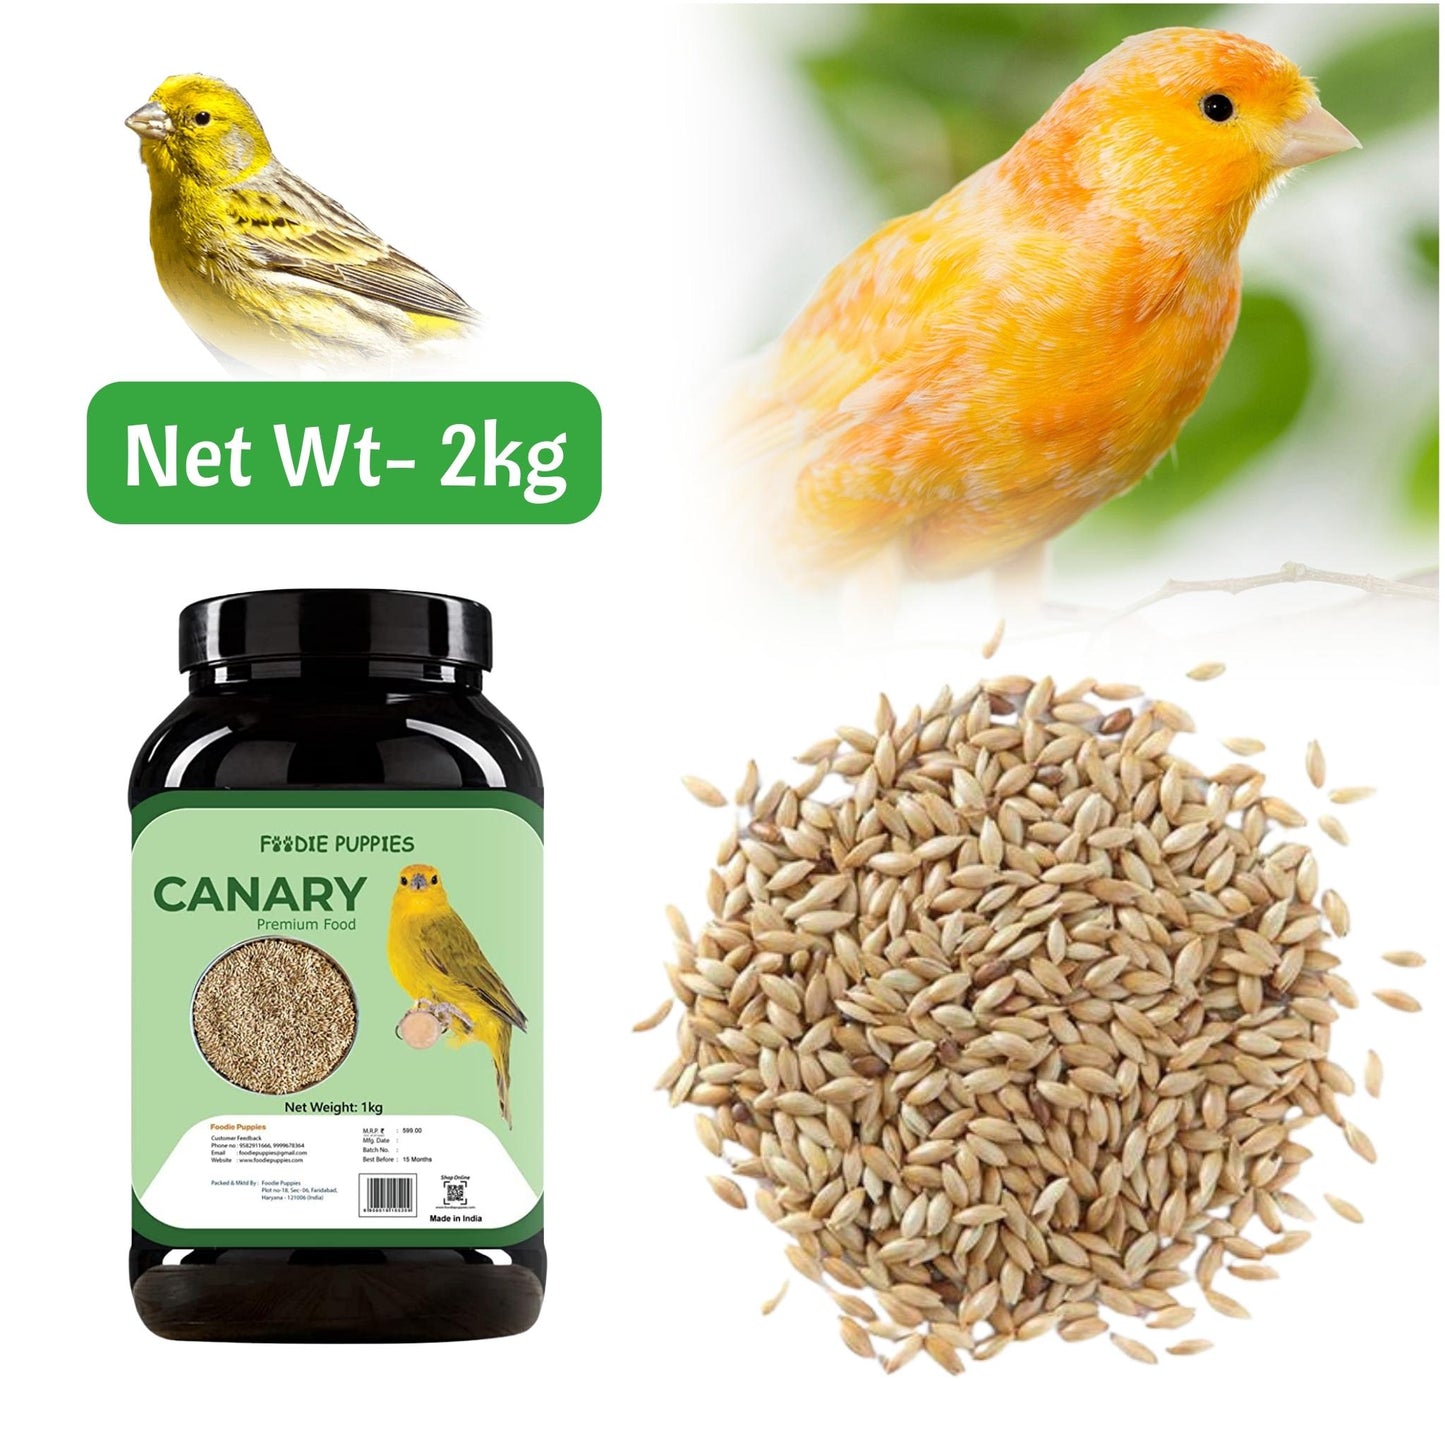 Foodie Puppies Canary Seeds - 2Kg | Suitable for All Types of Birds